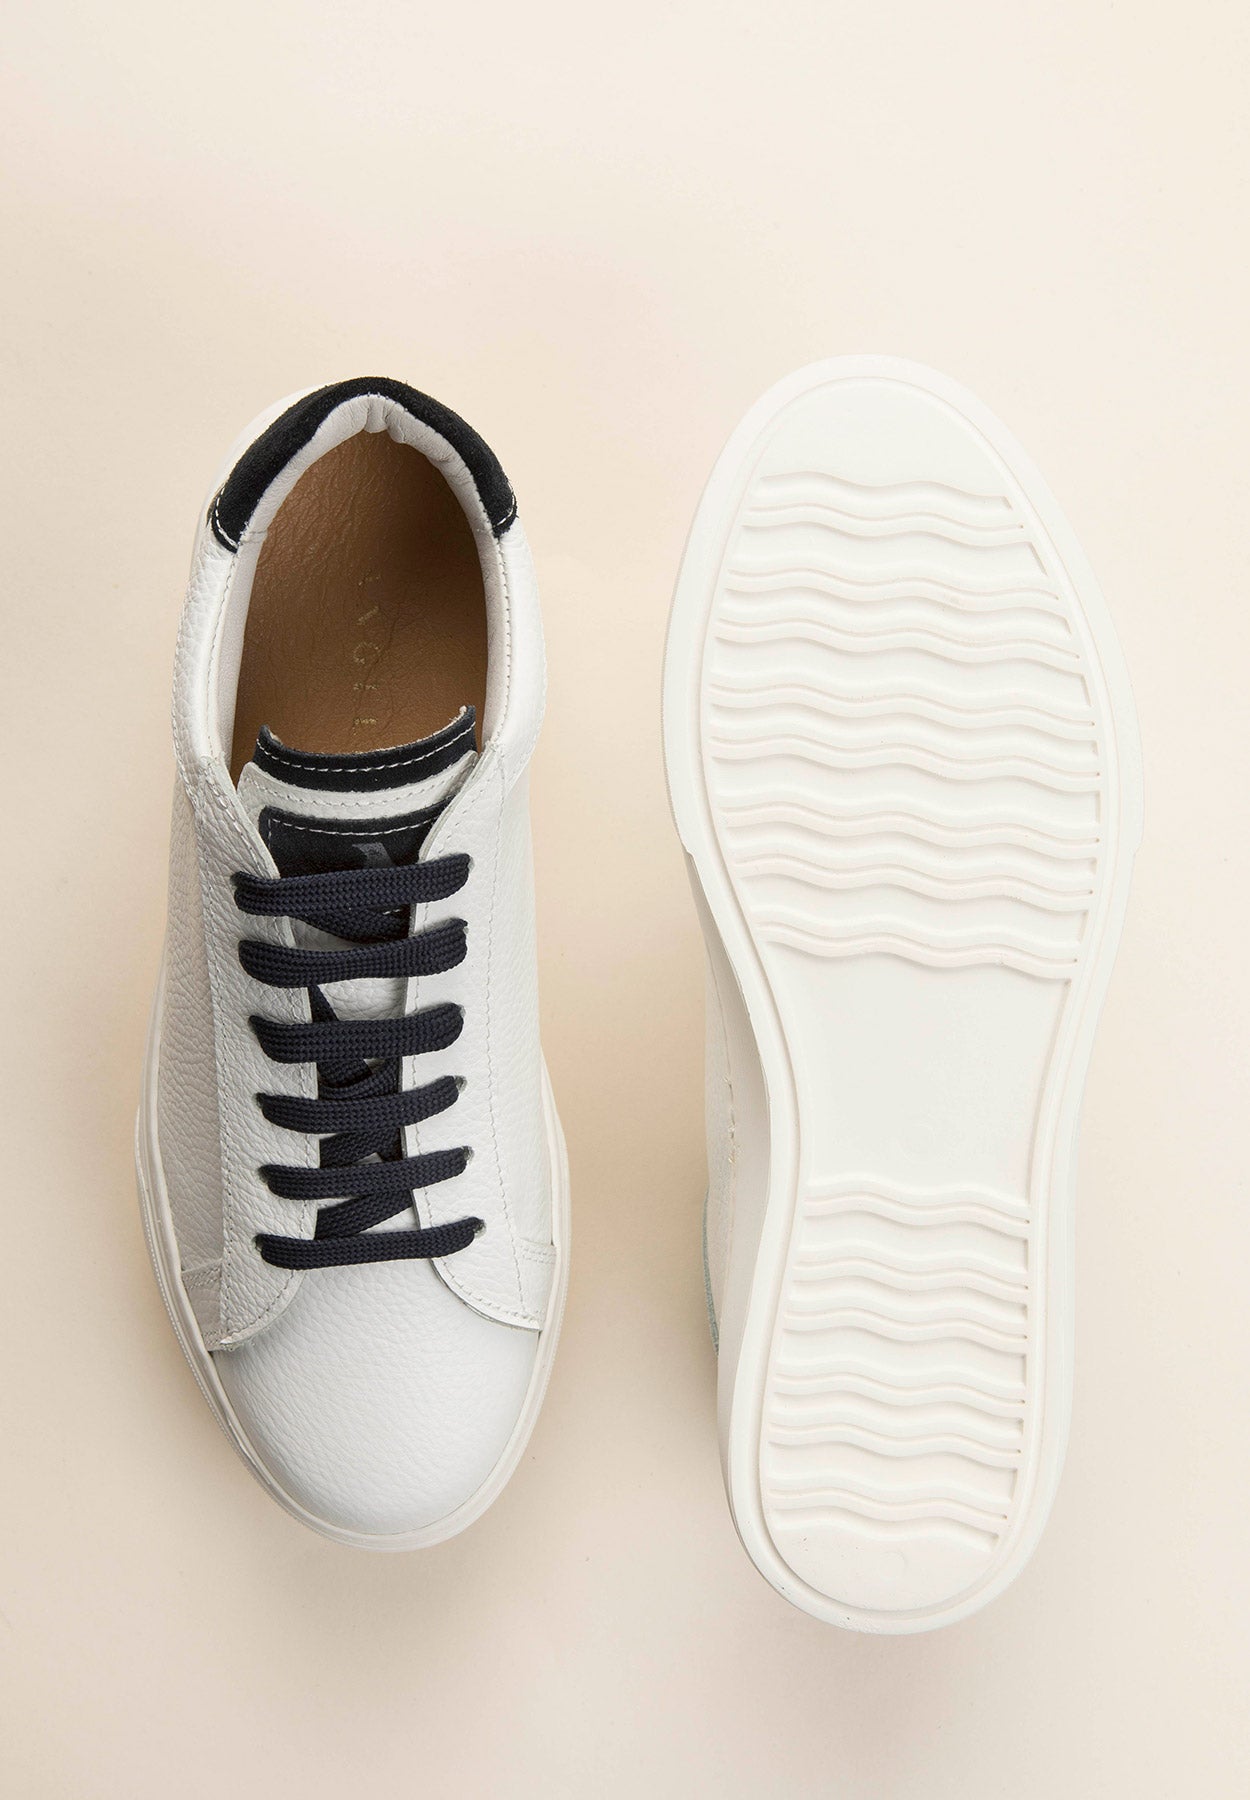 White leather sneakers with blue laces